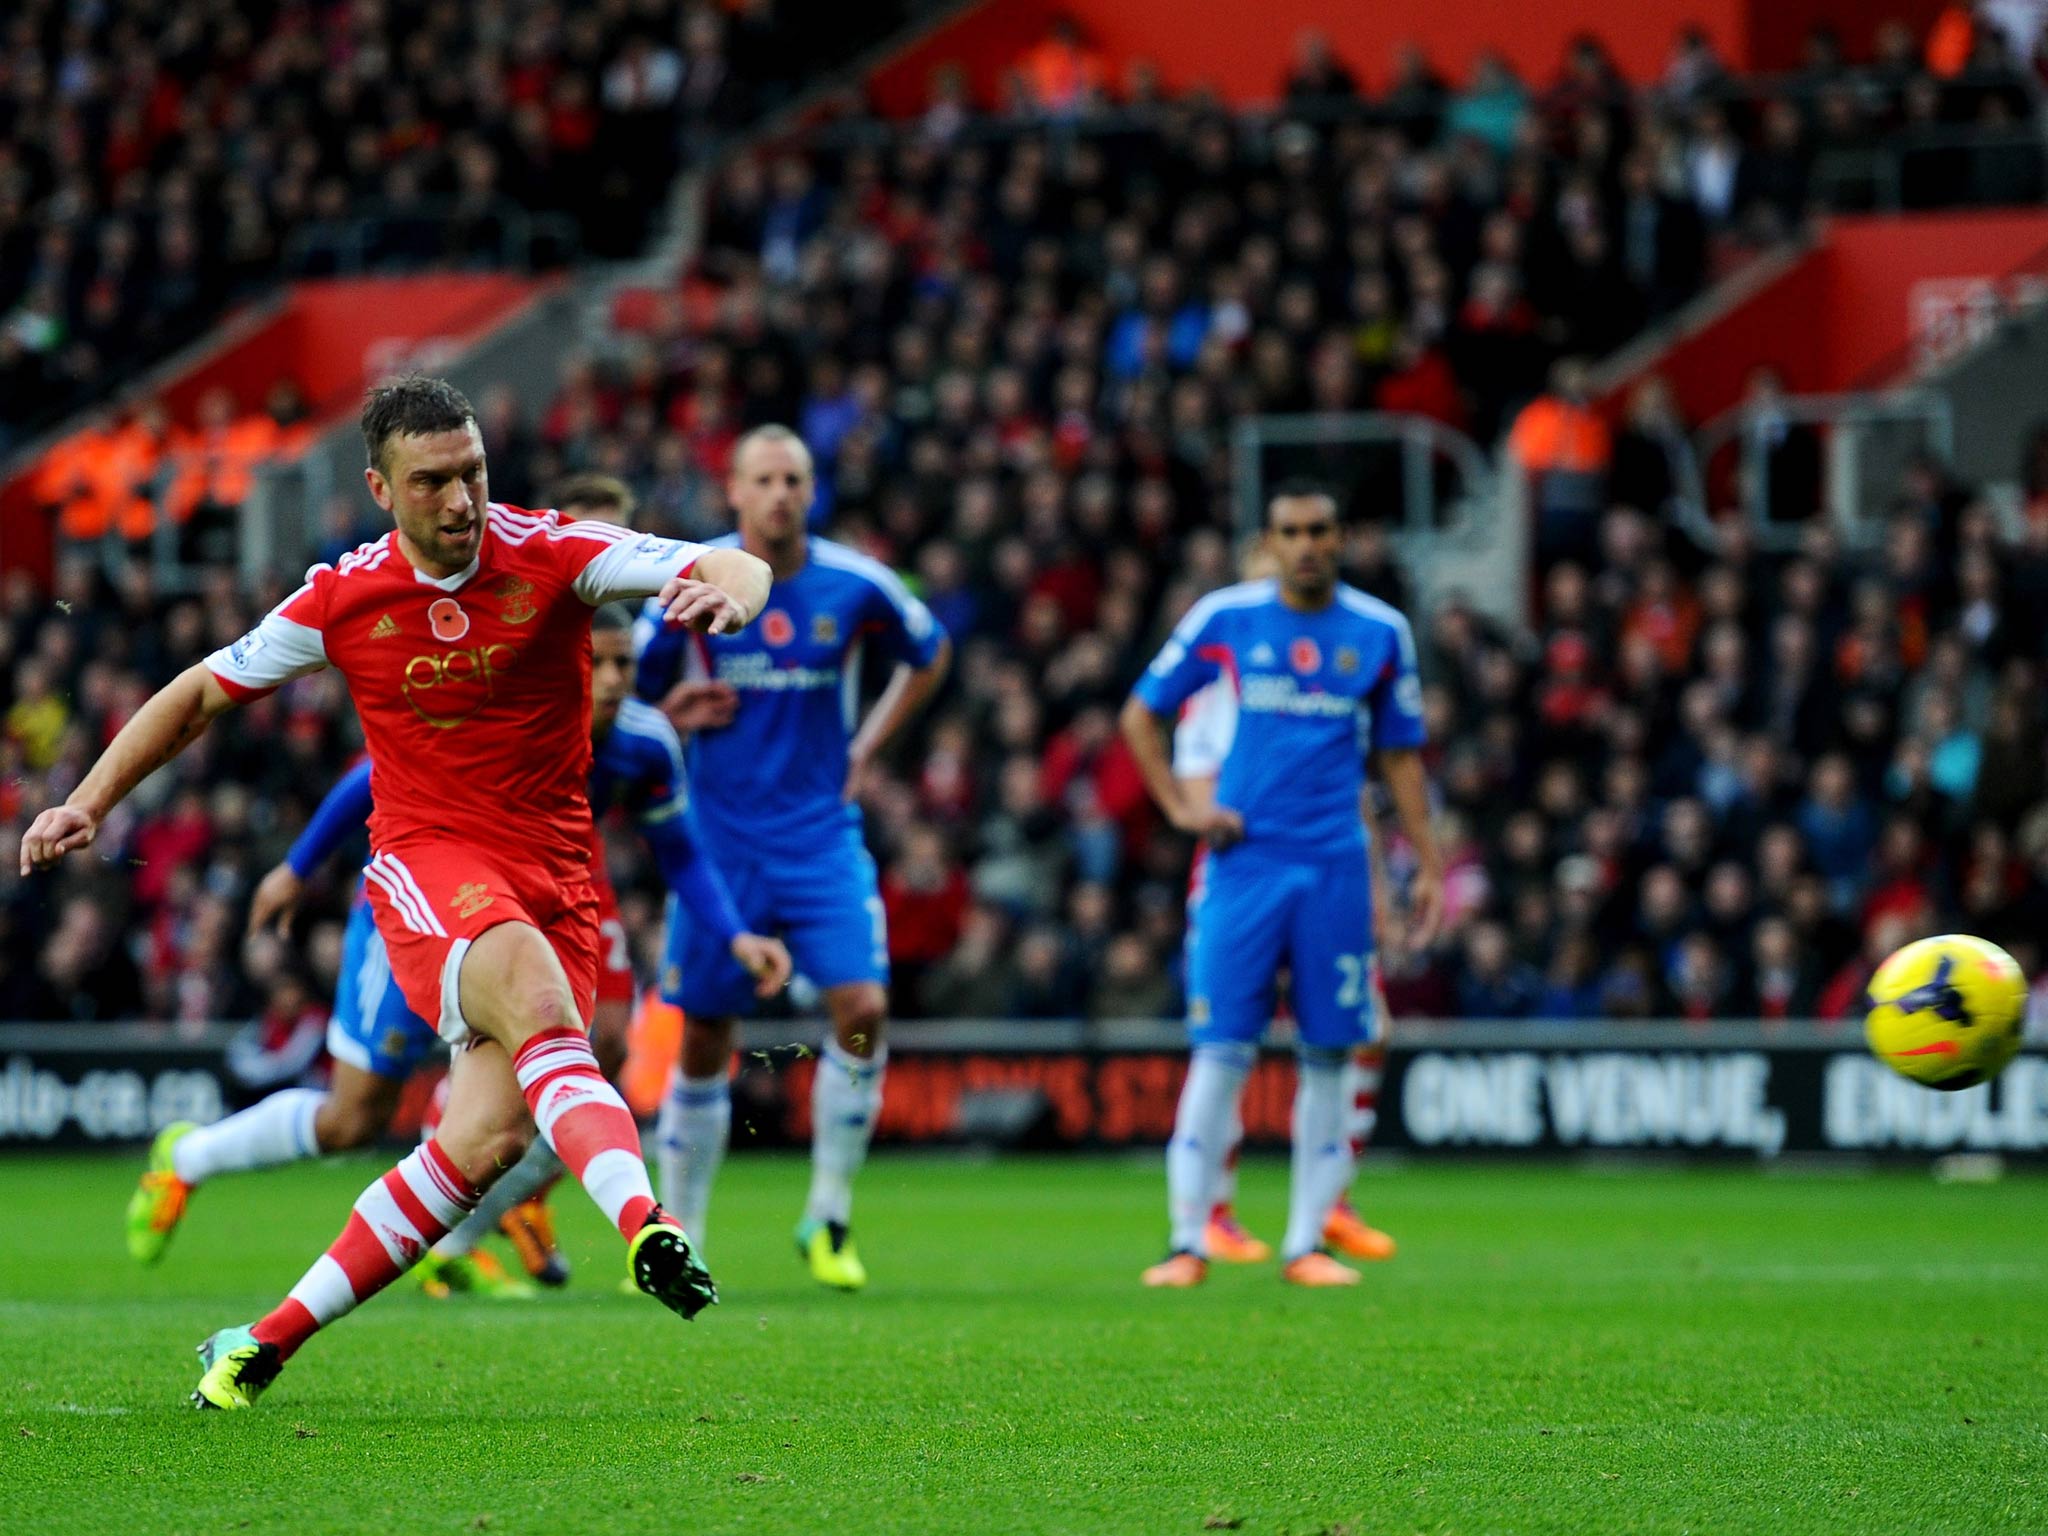 Rickie Lambert of Southampton scores their secondg goal from a penalty kick